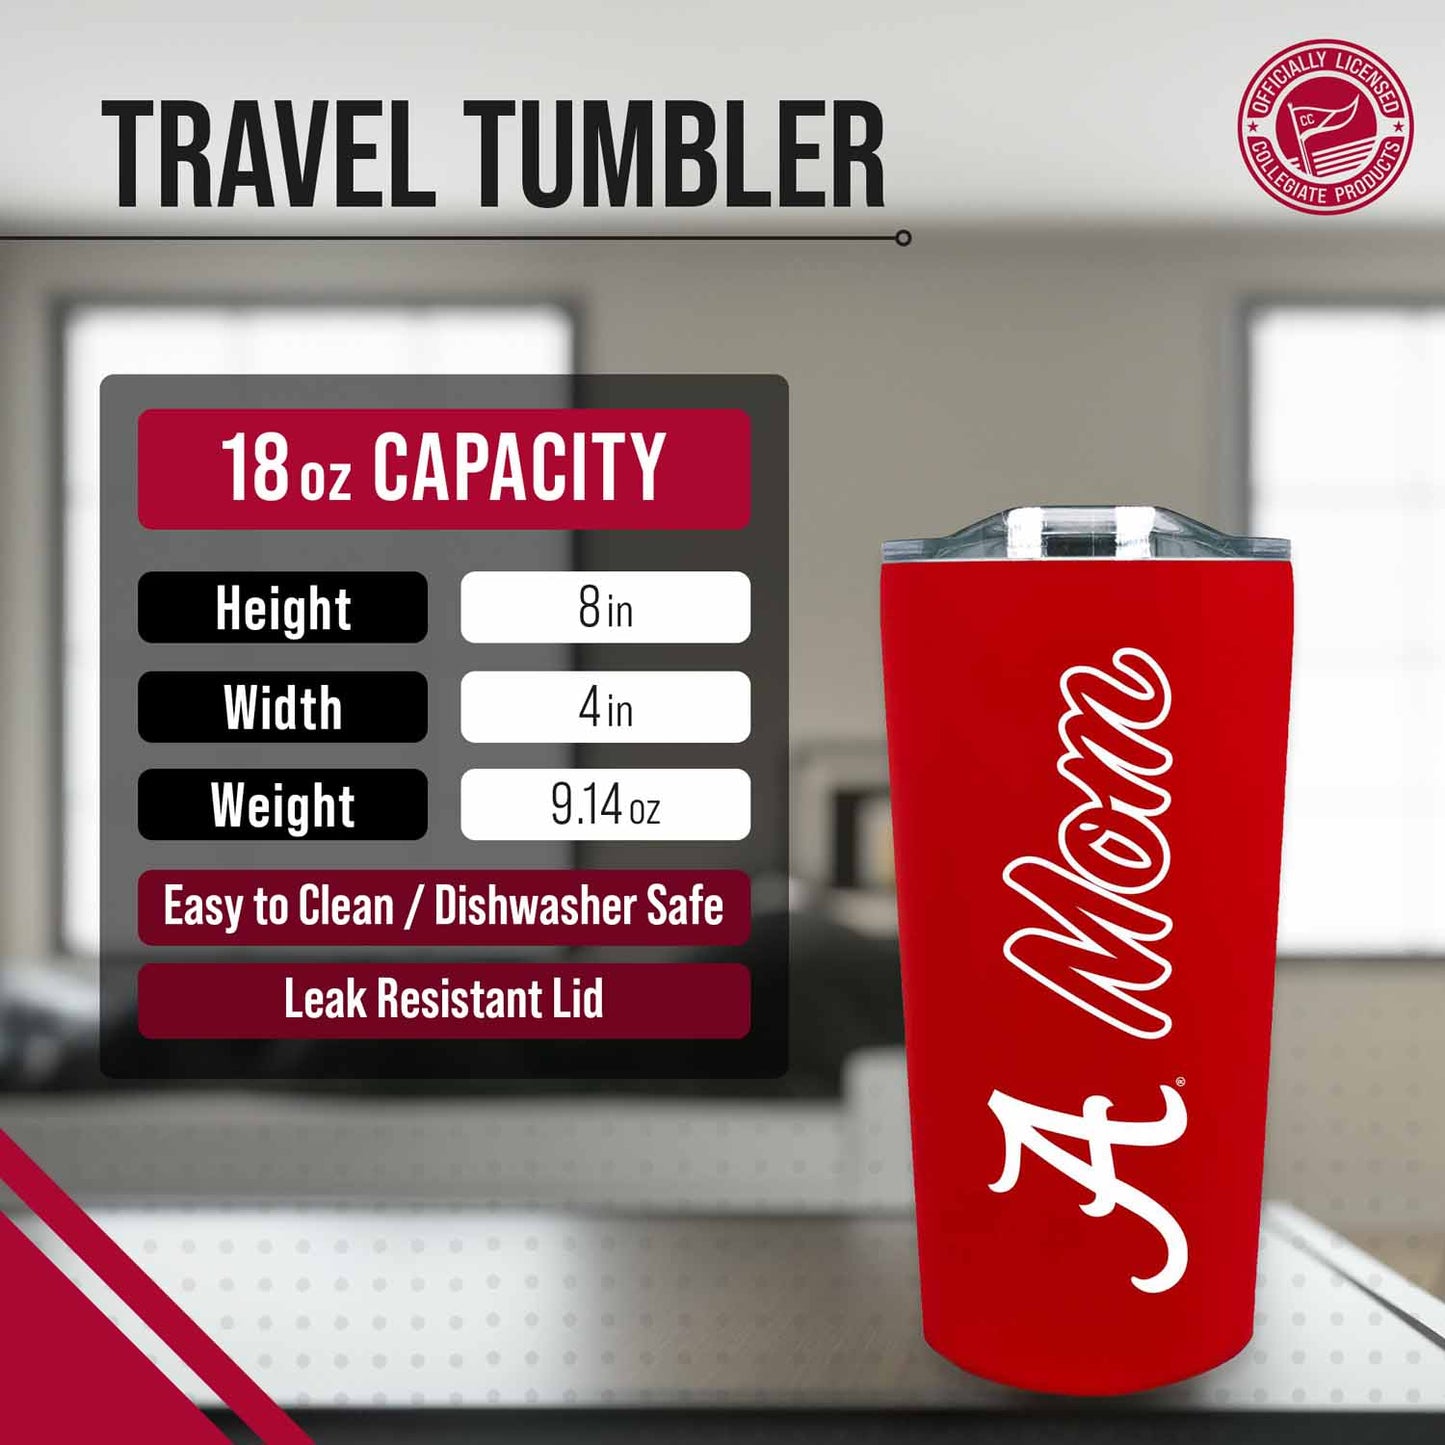 Ohio State Buckeyes NCAA Stainless Steel Travel Tumbler for Mom - Red